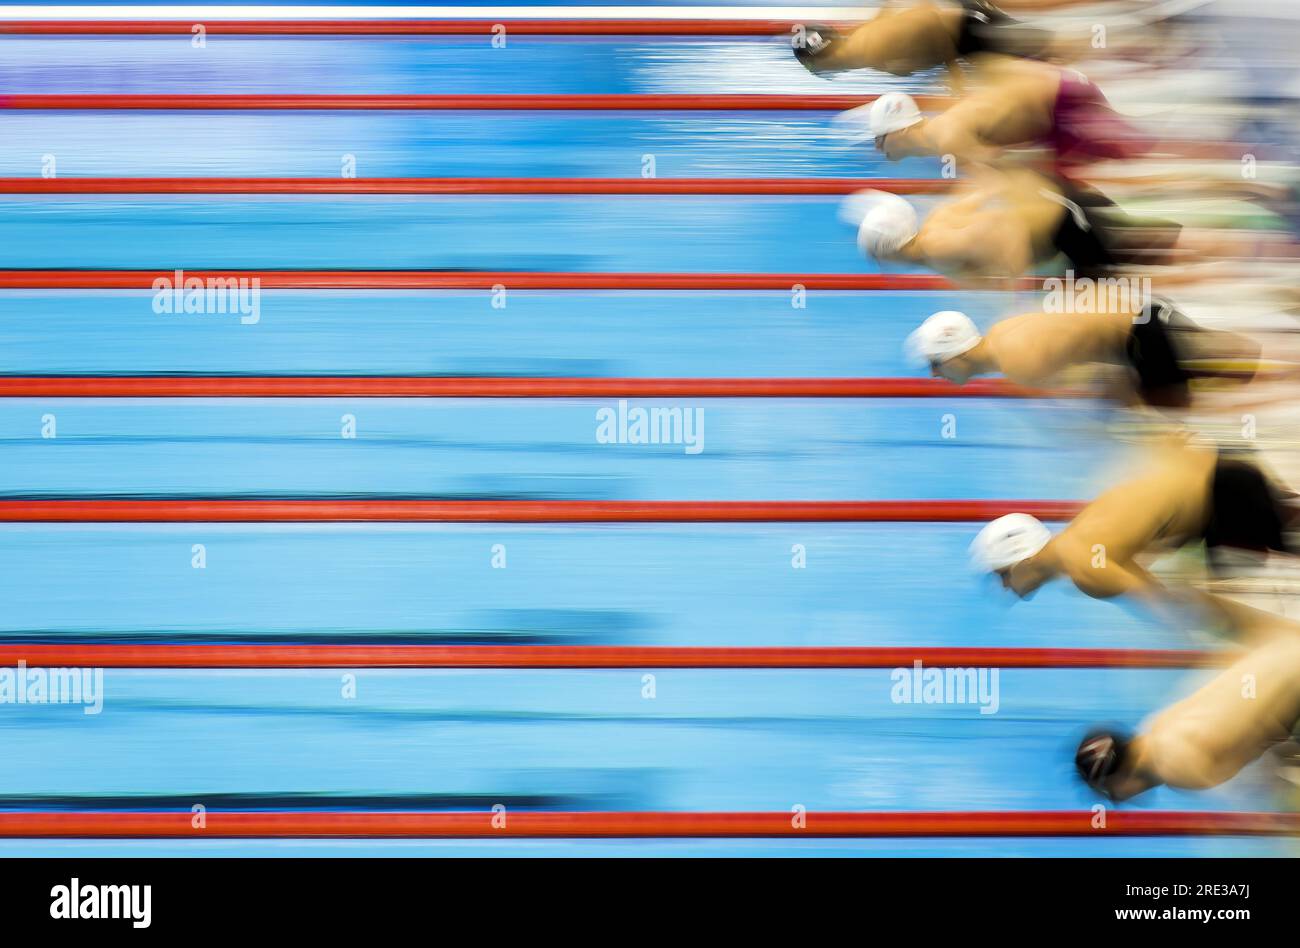 FUKUOKA - Swimmers start the men's 200 butterfly during the third day of the World Swimming Championships in Japan. ANP KOEN VAN WEEL netherlands out - belgium out Stock Photo